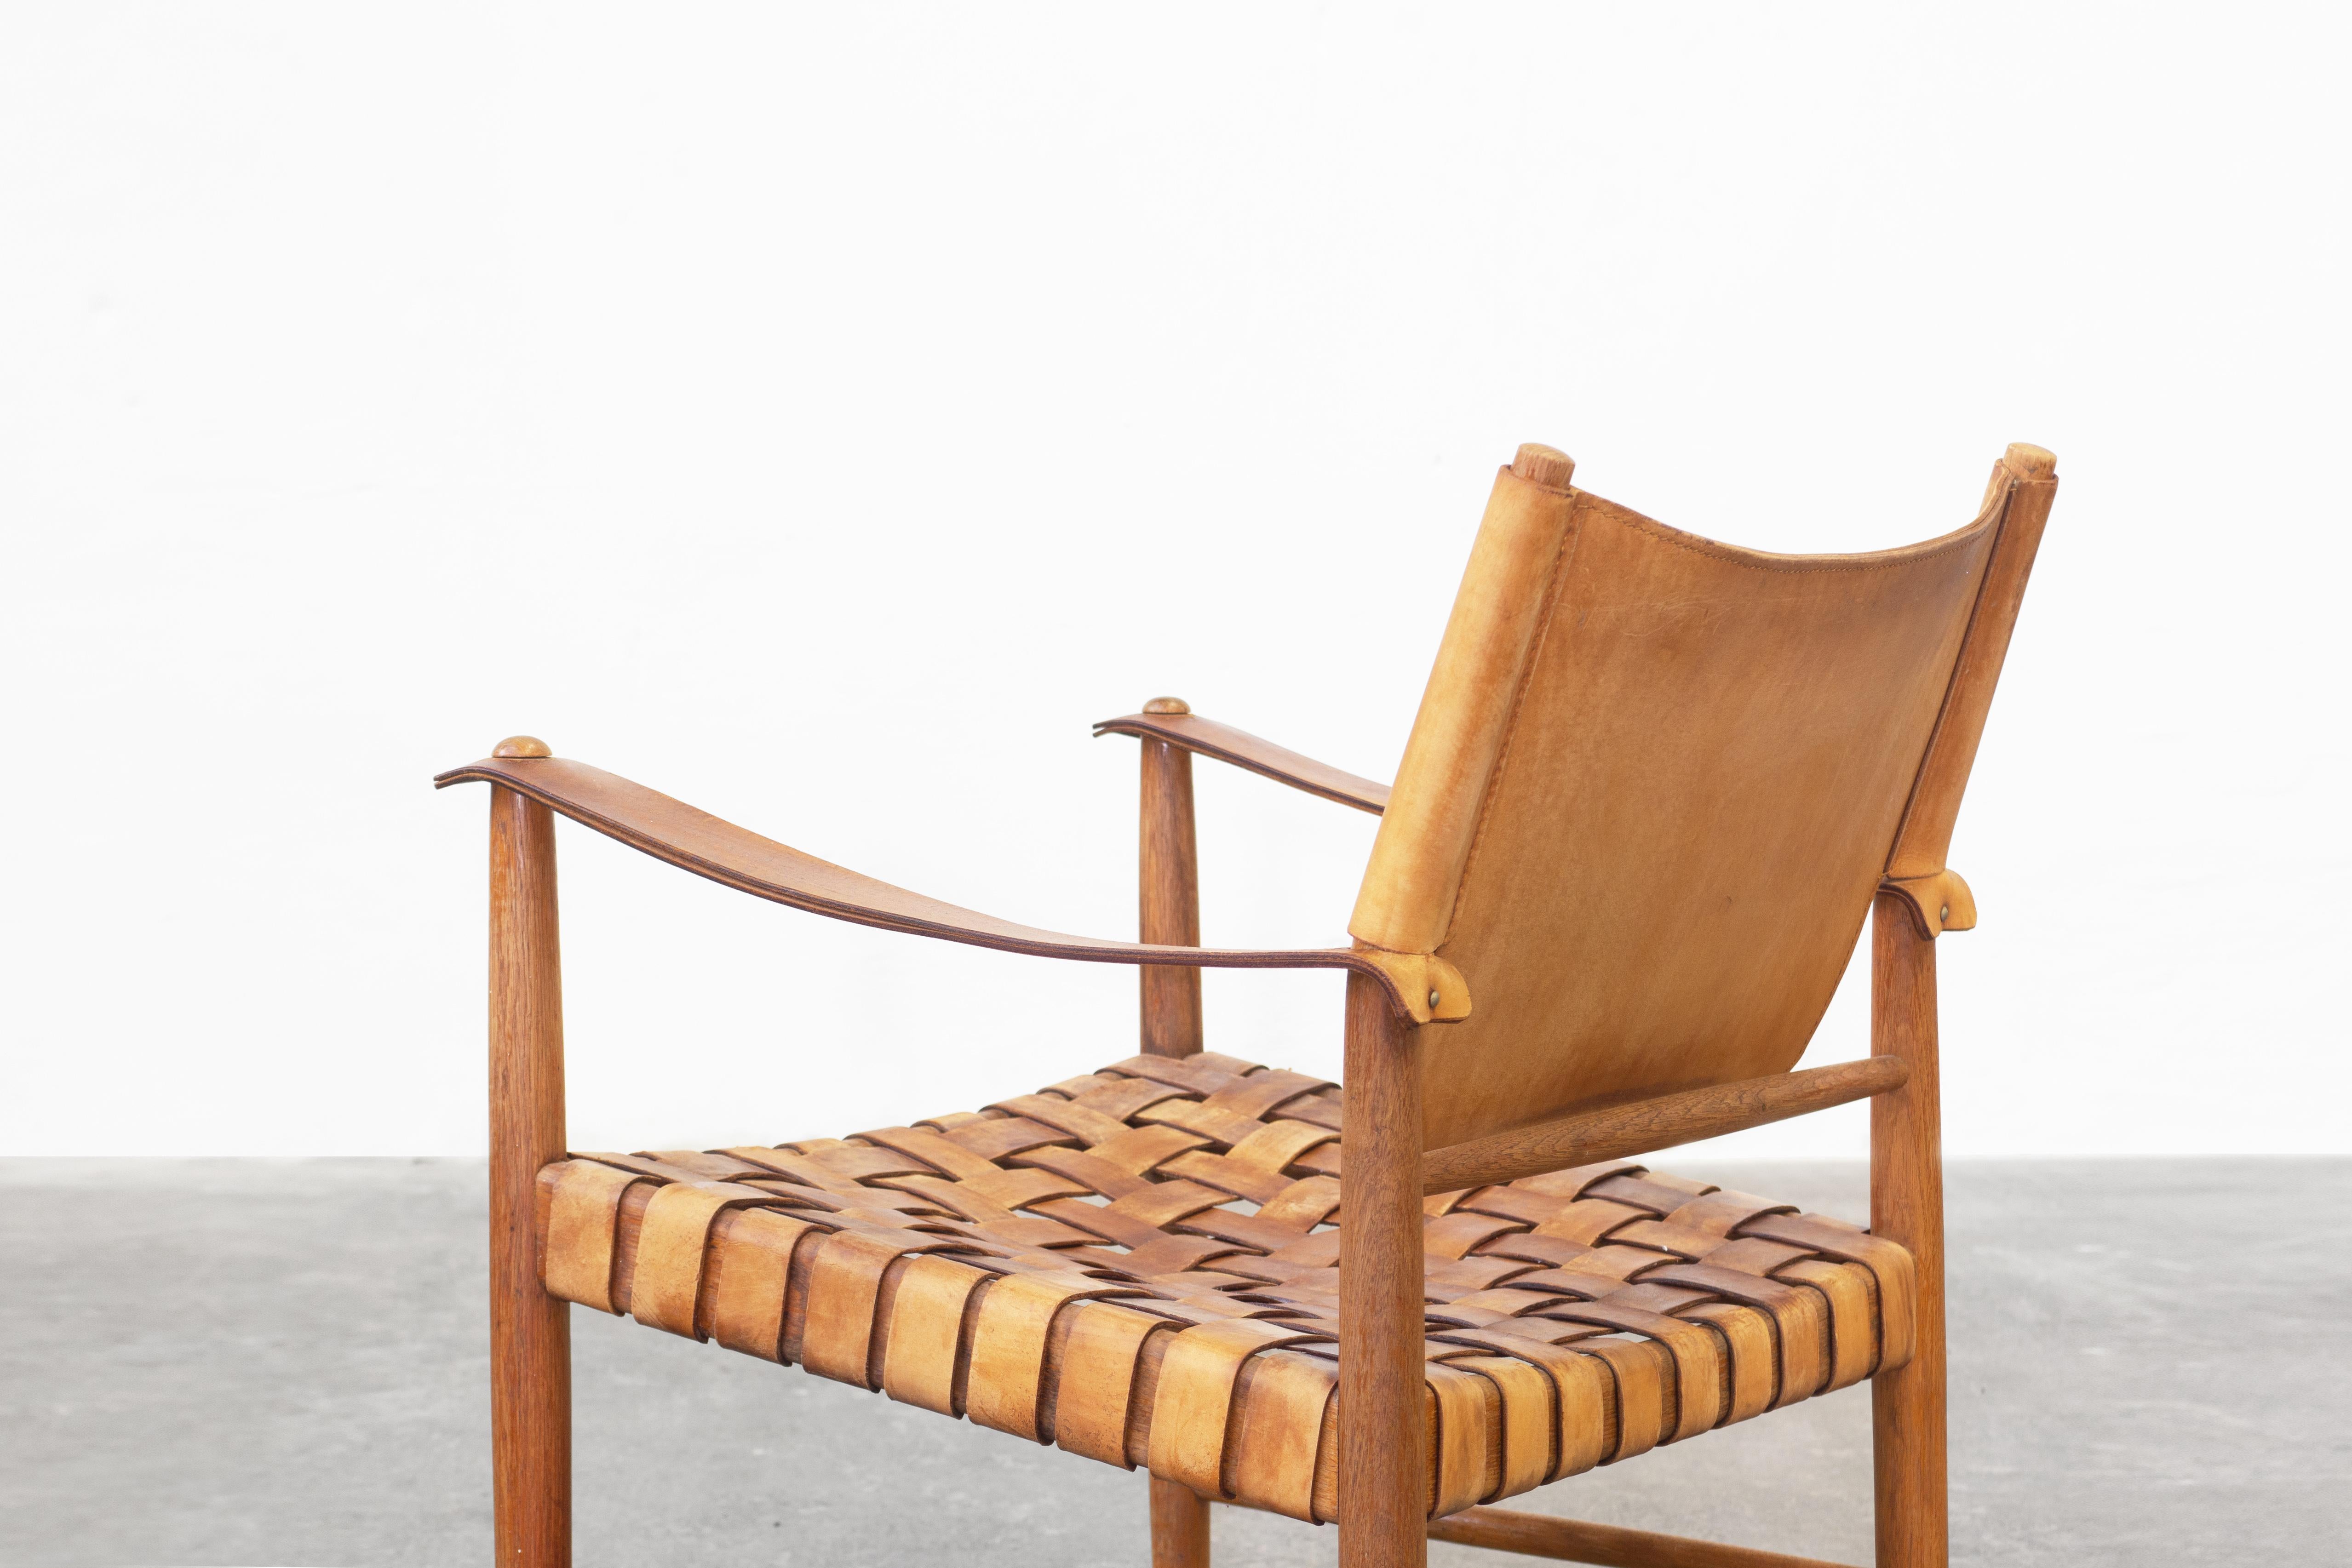 20th Century Safari Leather Lounge Chairs in the Style of Børge Mogensen For Sale